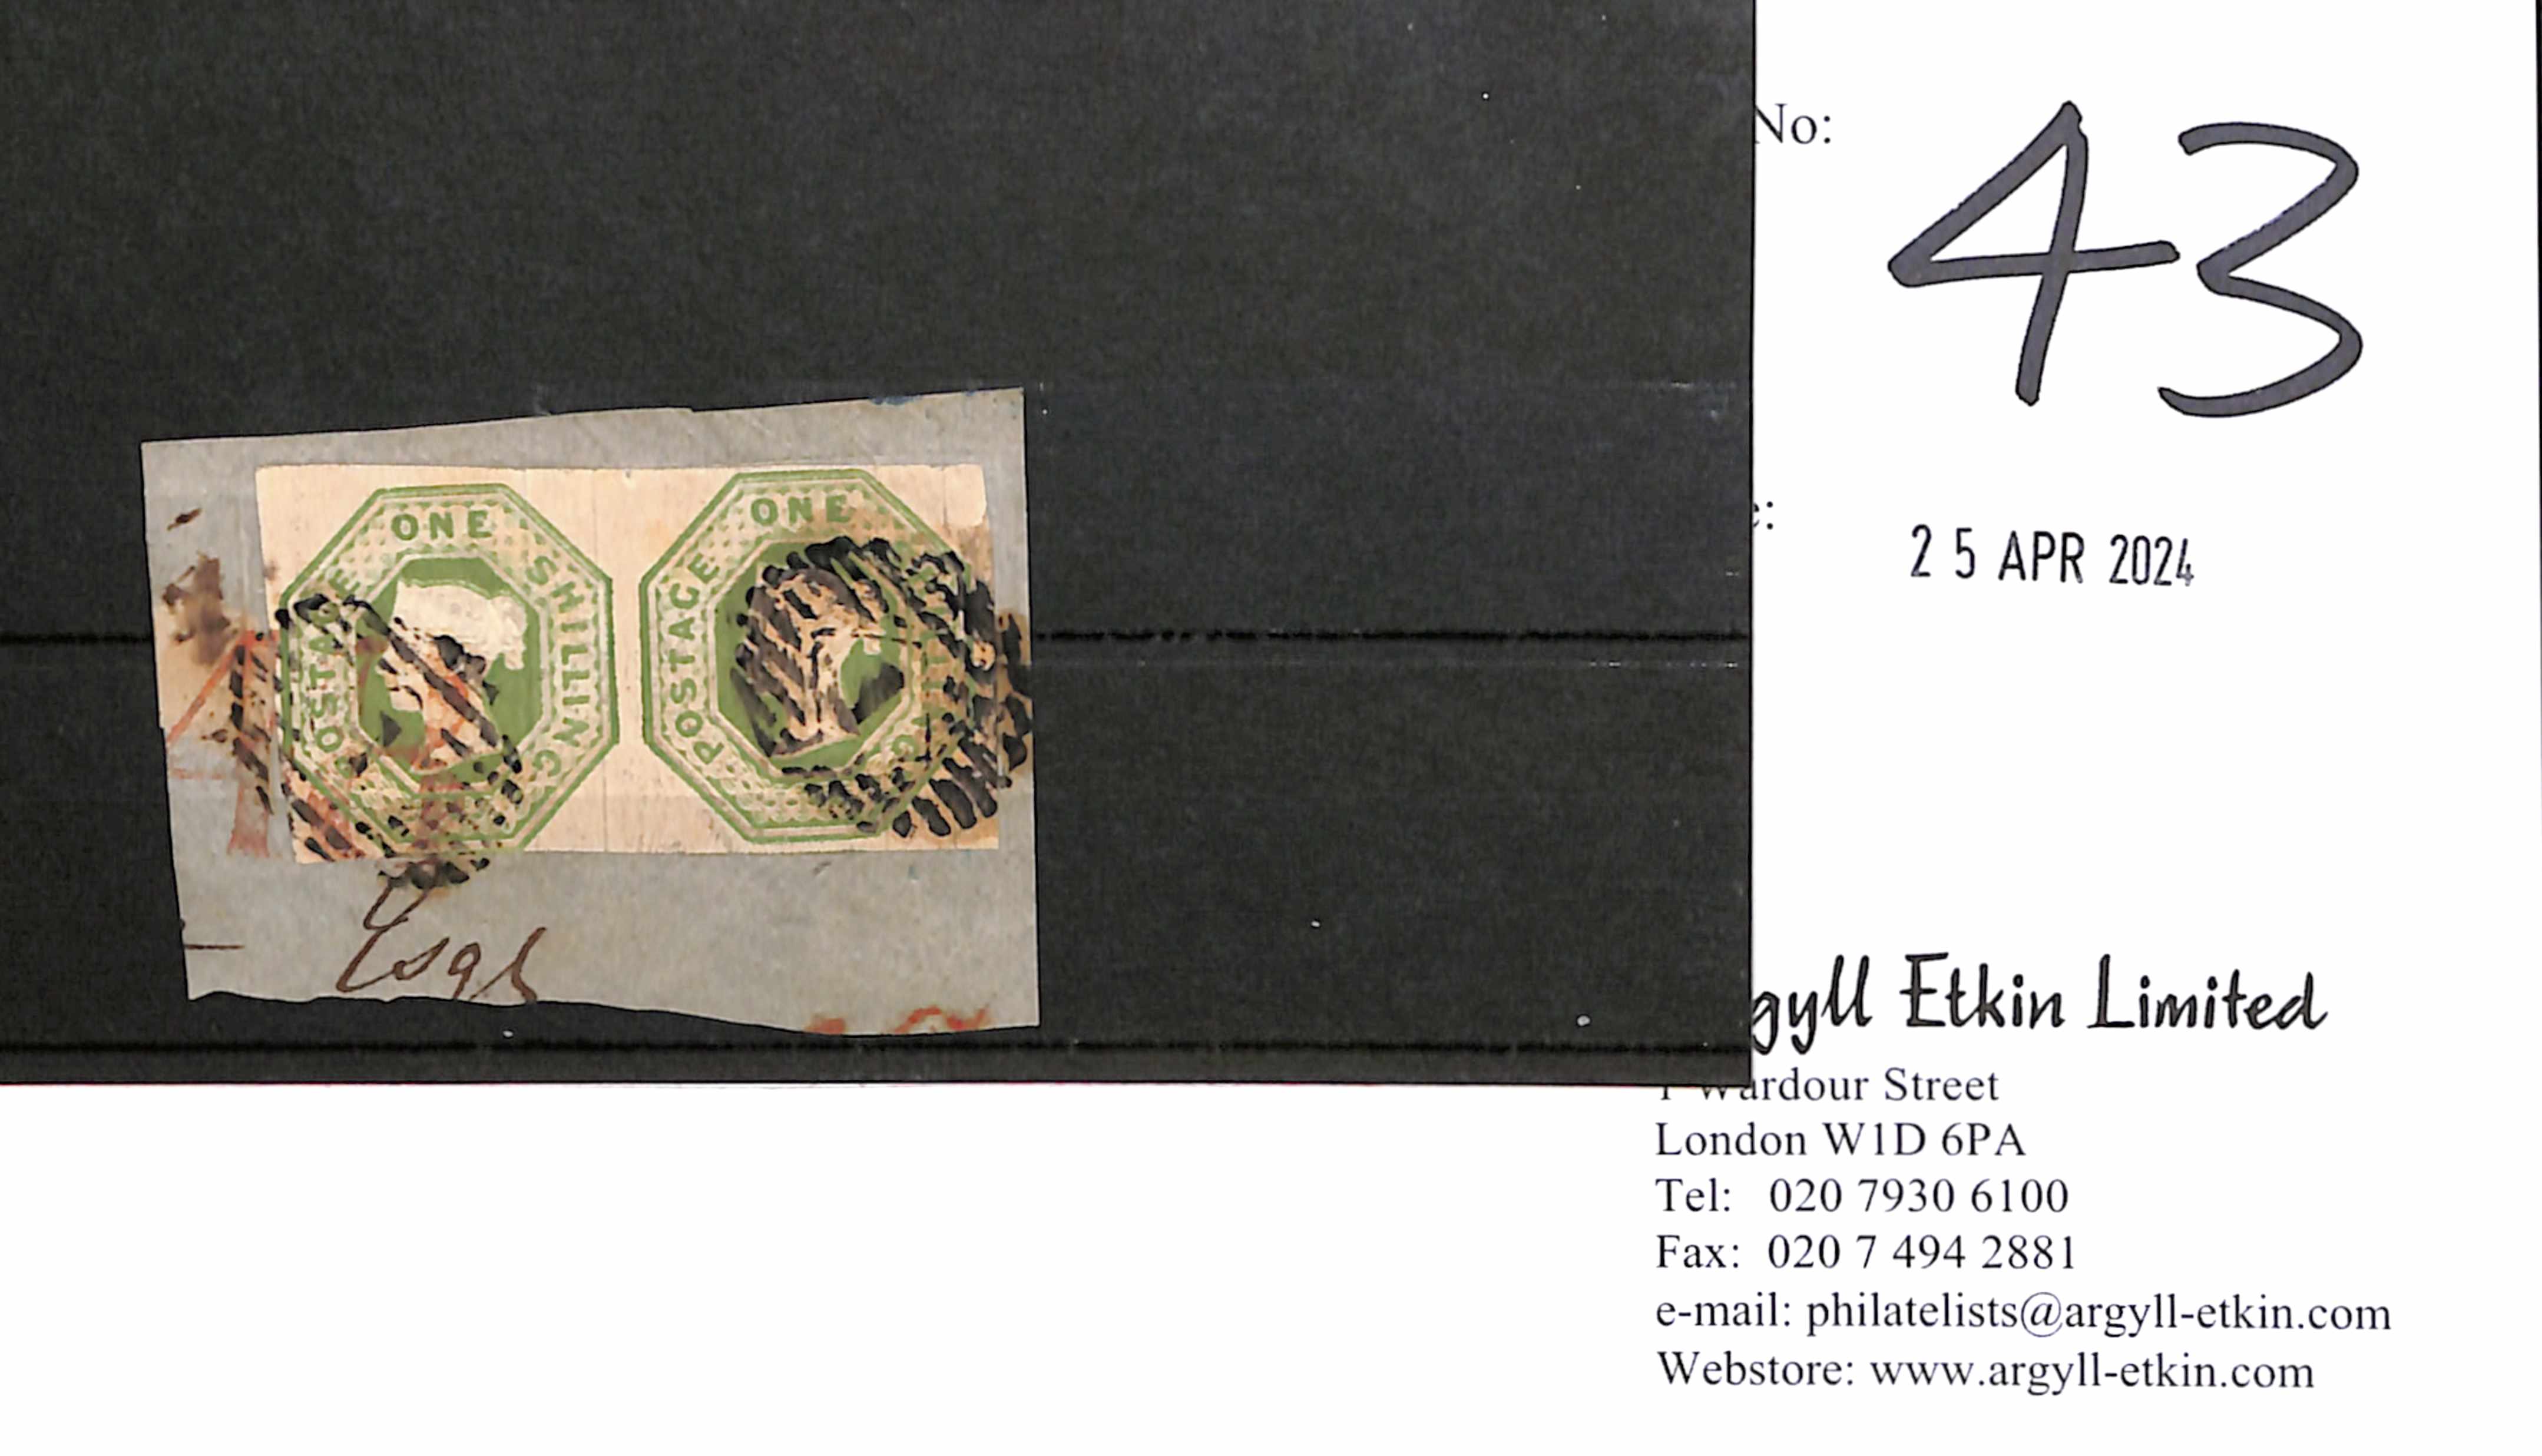 1847-54 Embossed 1/- green, horizontal pair used with London numeral cancels, the left stamp also